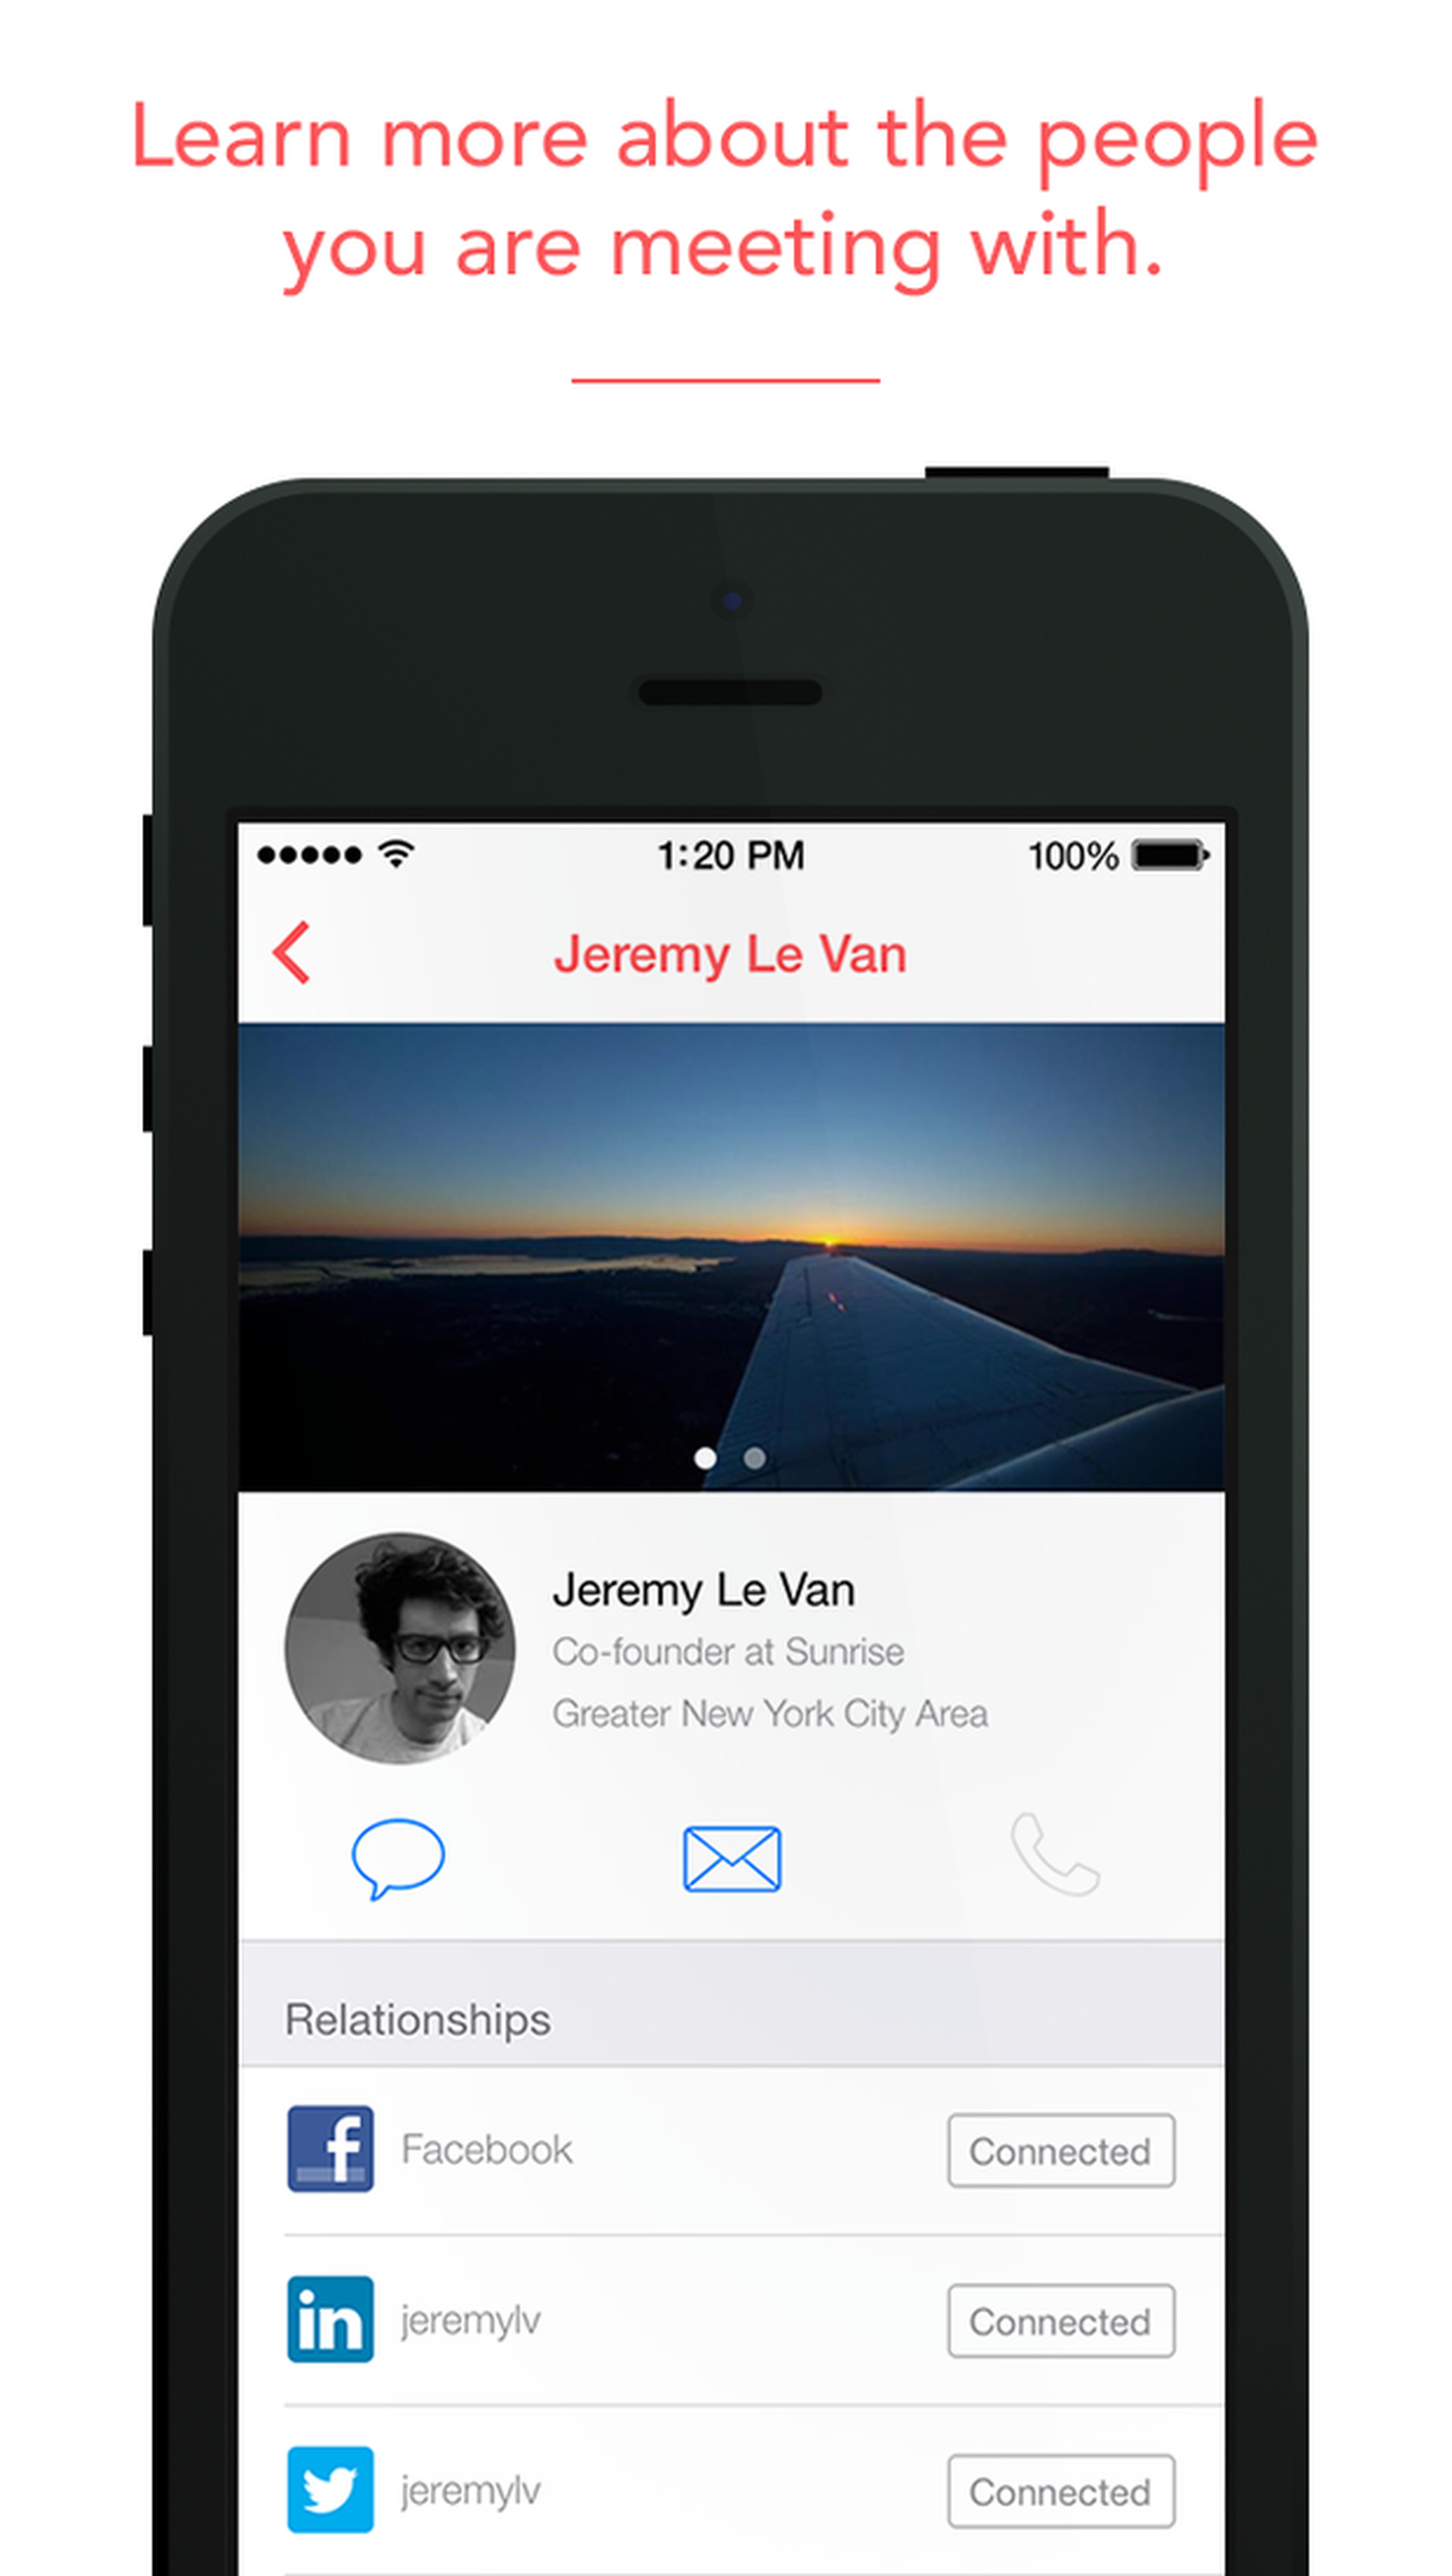 Sunrise calendar for iPhone debuts iOS 7 redesign, iCloud support The